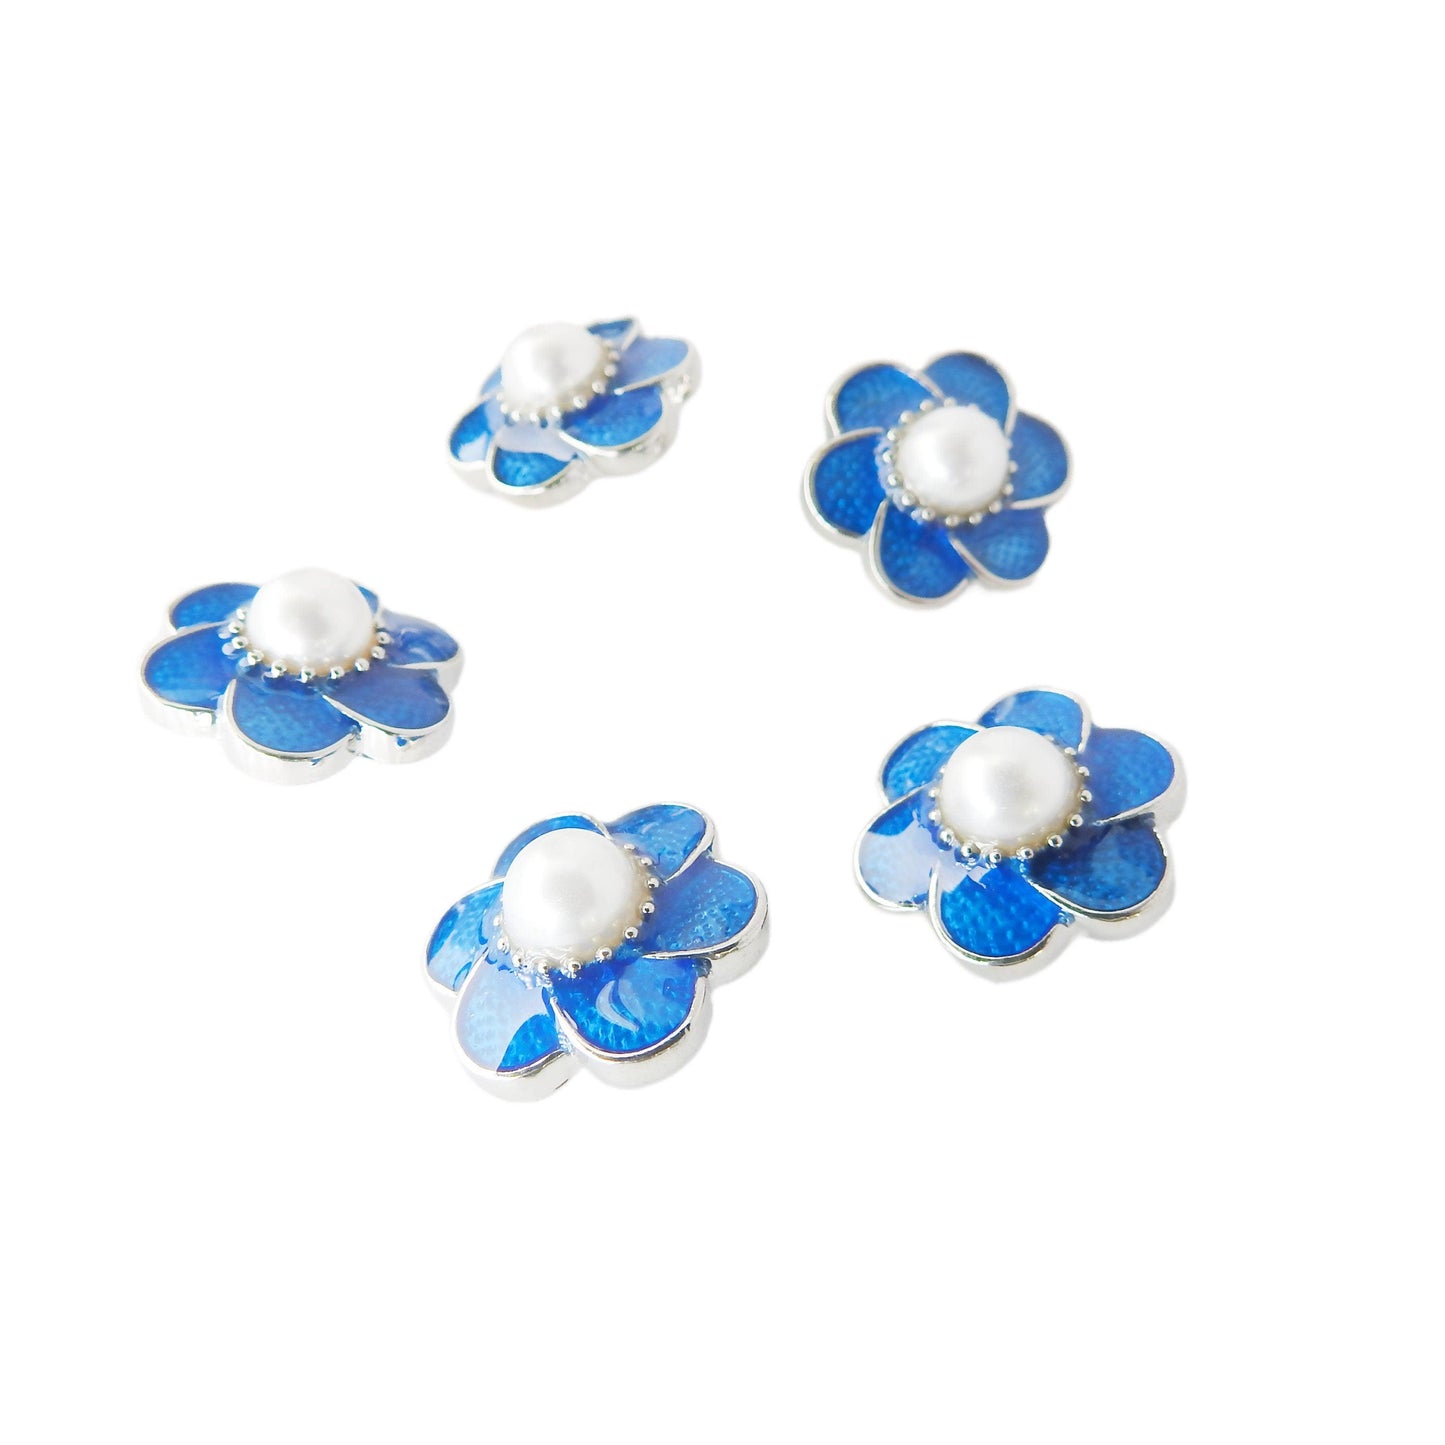 Flower-shaped Pearl snaps fasteners for jewelry, keychain, wristband bracelet, wallets for women, purse or pouch. 5 fancy snap buttons 18 mm